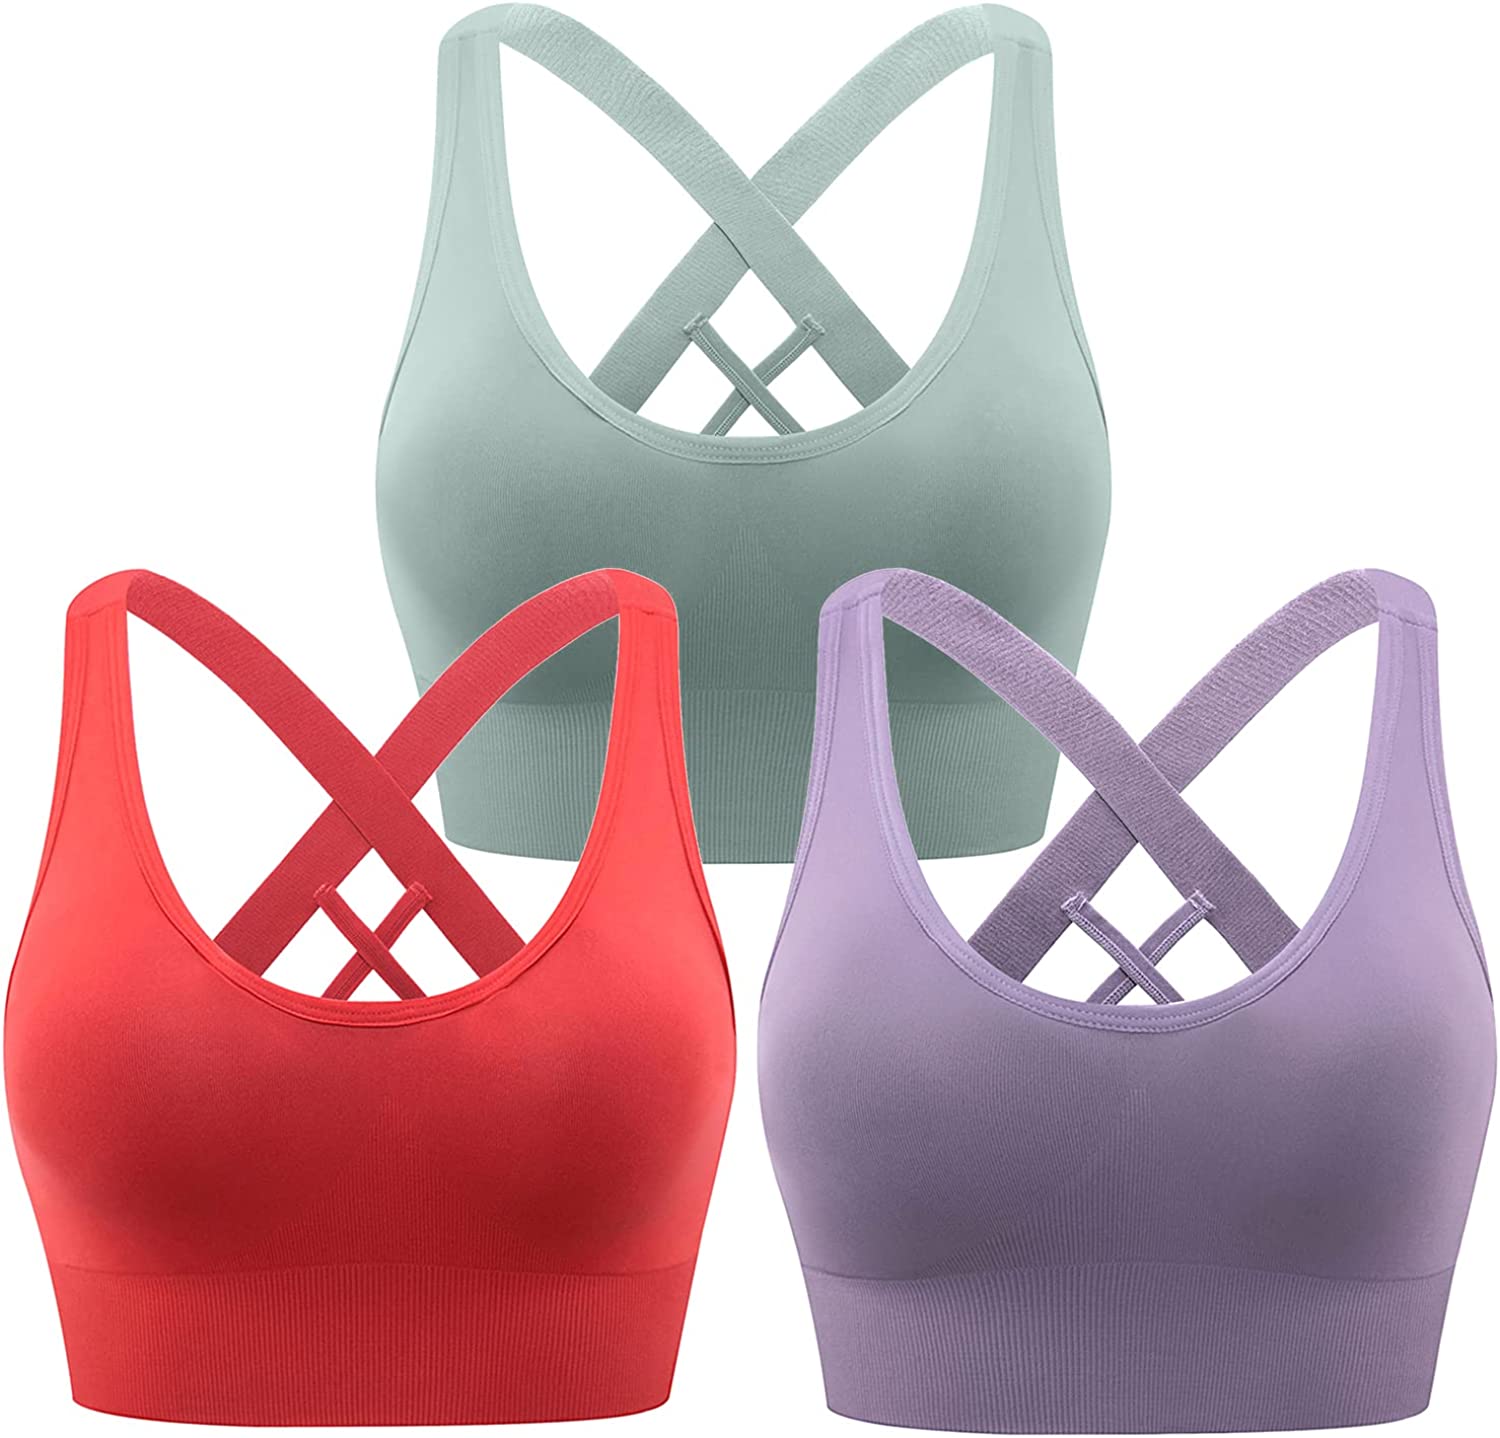 HANERDUN Womens Sport Bras Cross Back Removed Cup Support for Yoga